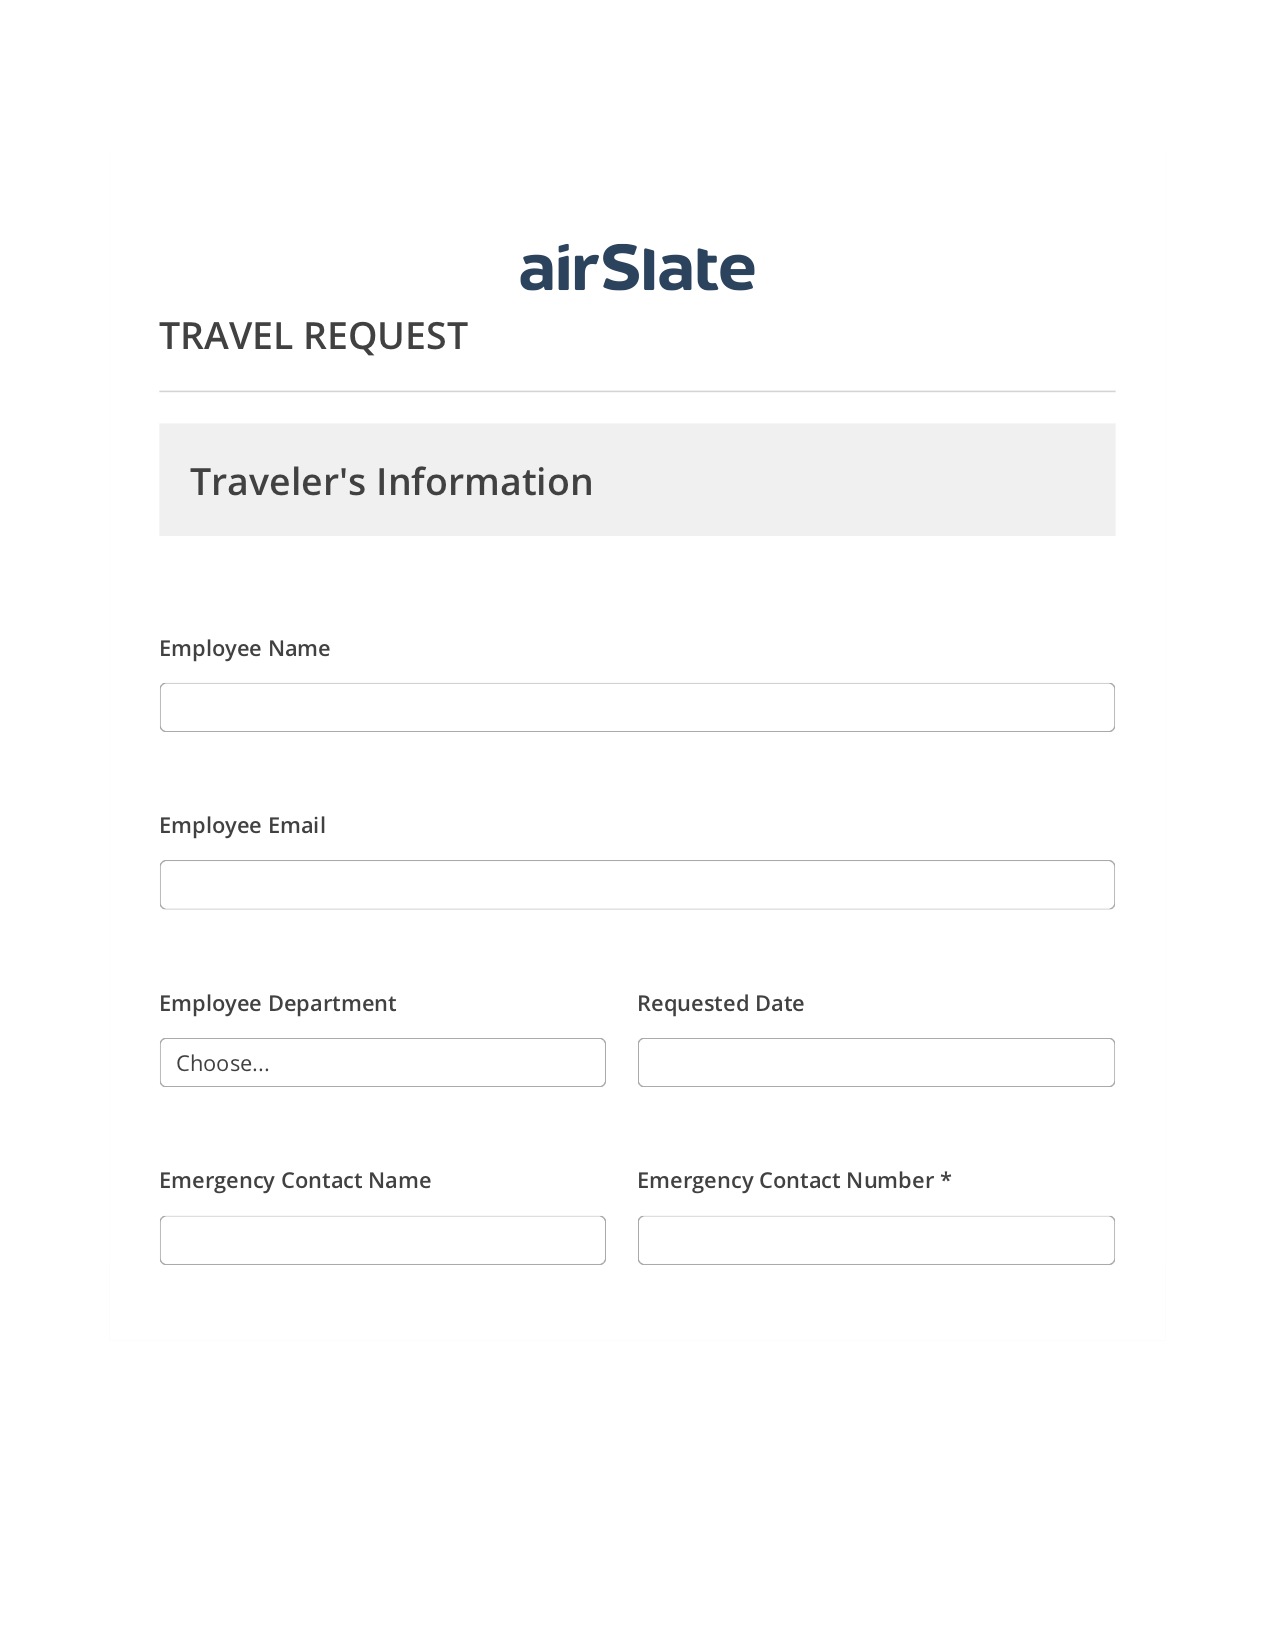 Travel Request Flow Pre-fill from Litmos bot